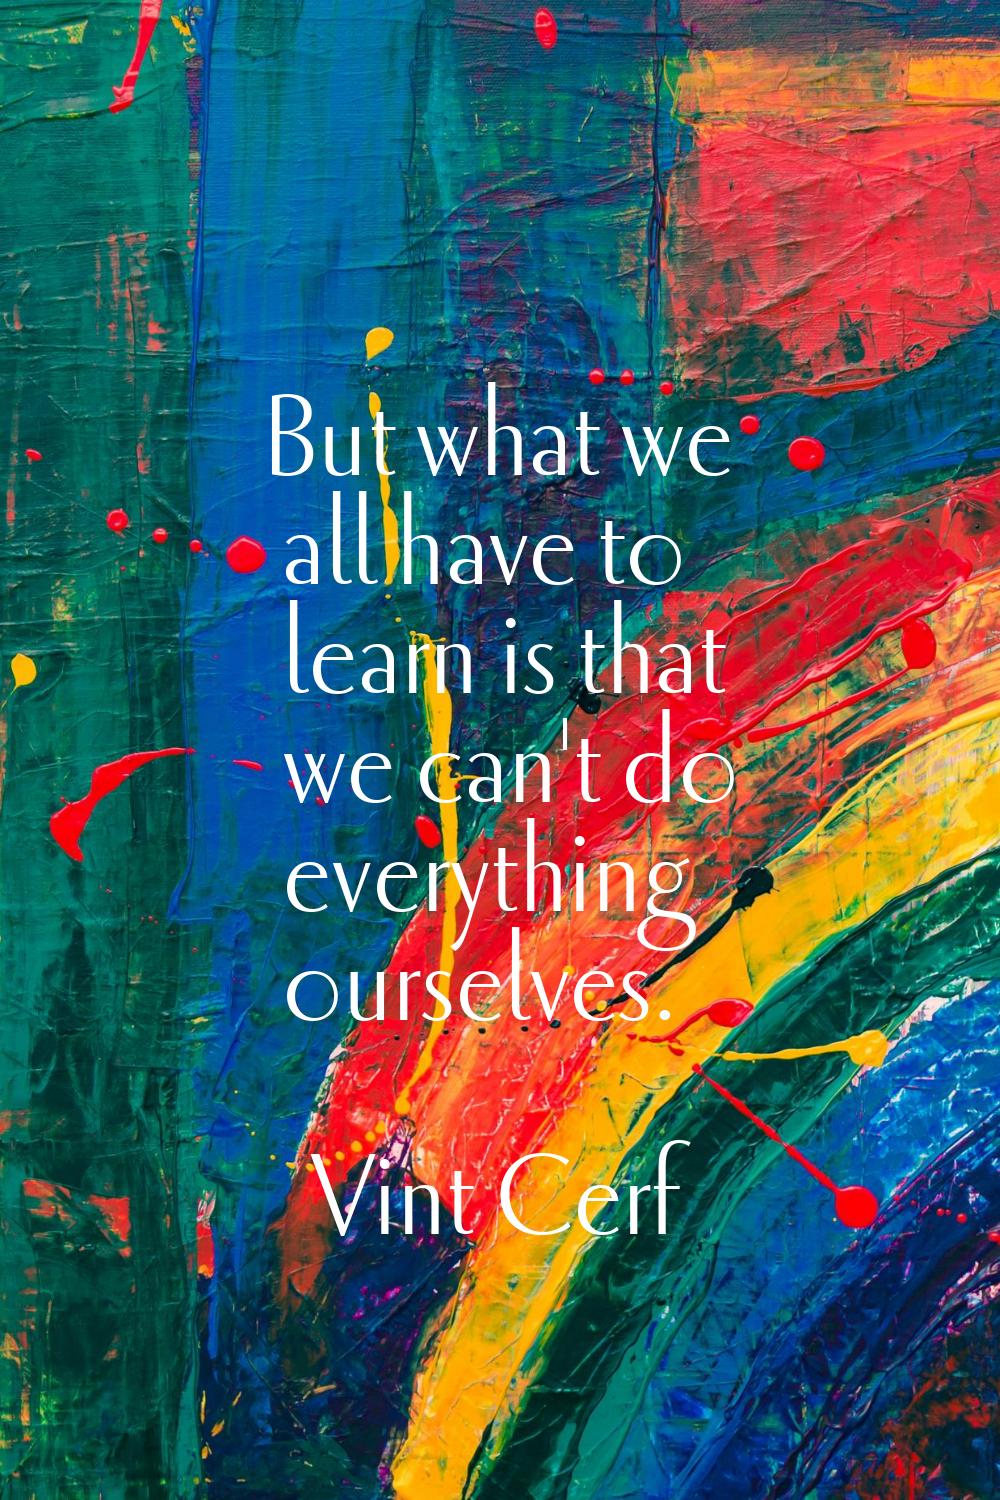 But what we all have to learn is that we can't do everything ourselves.